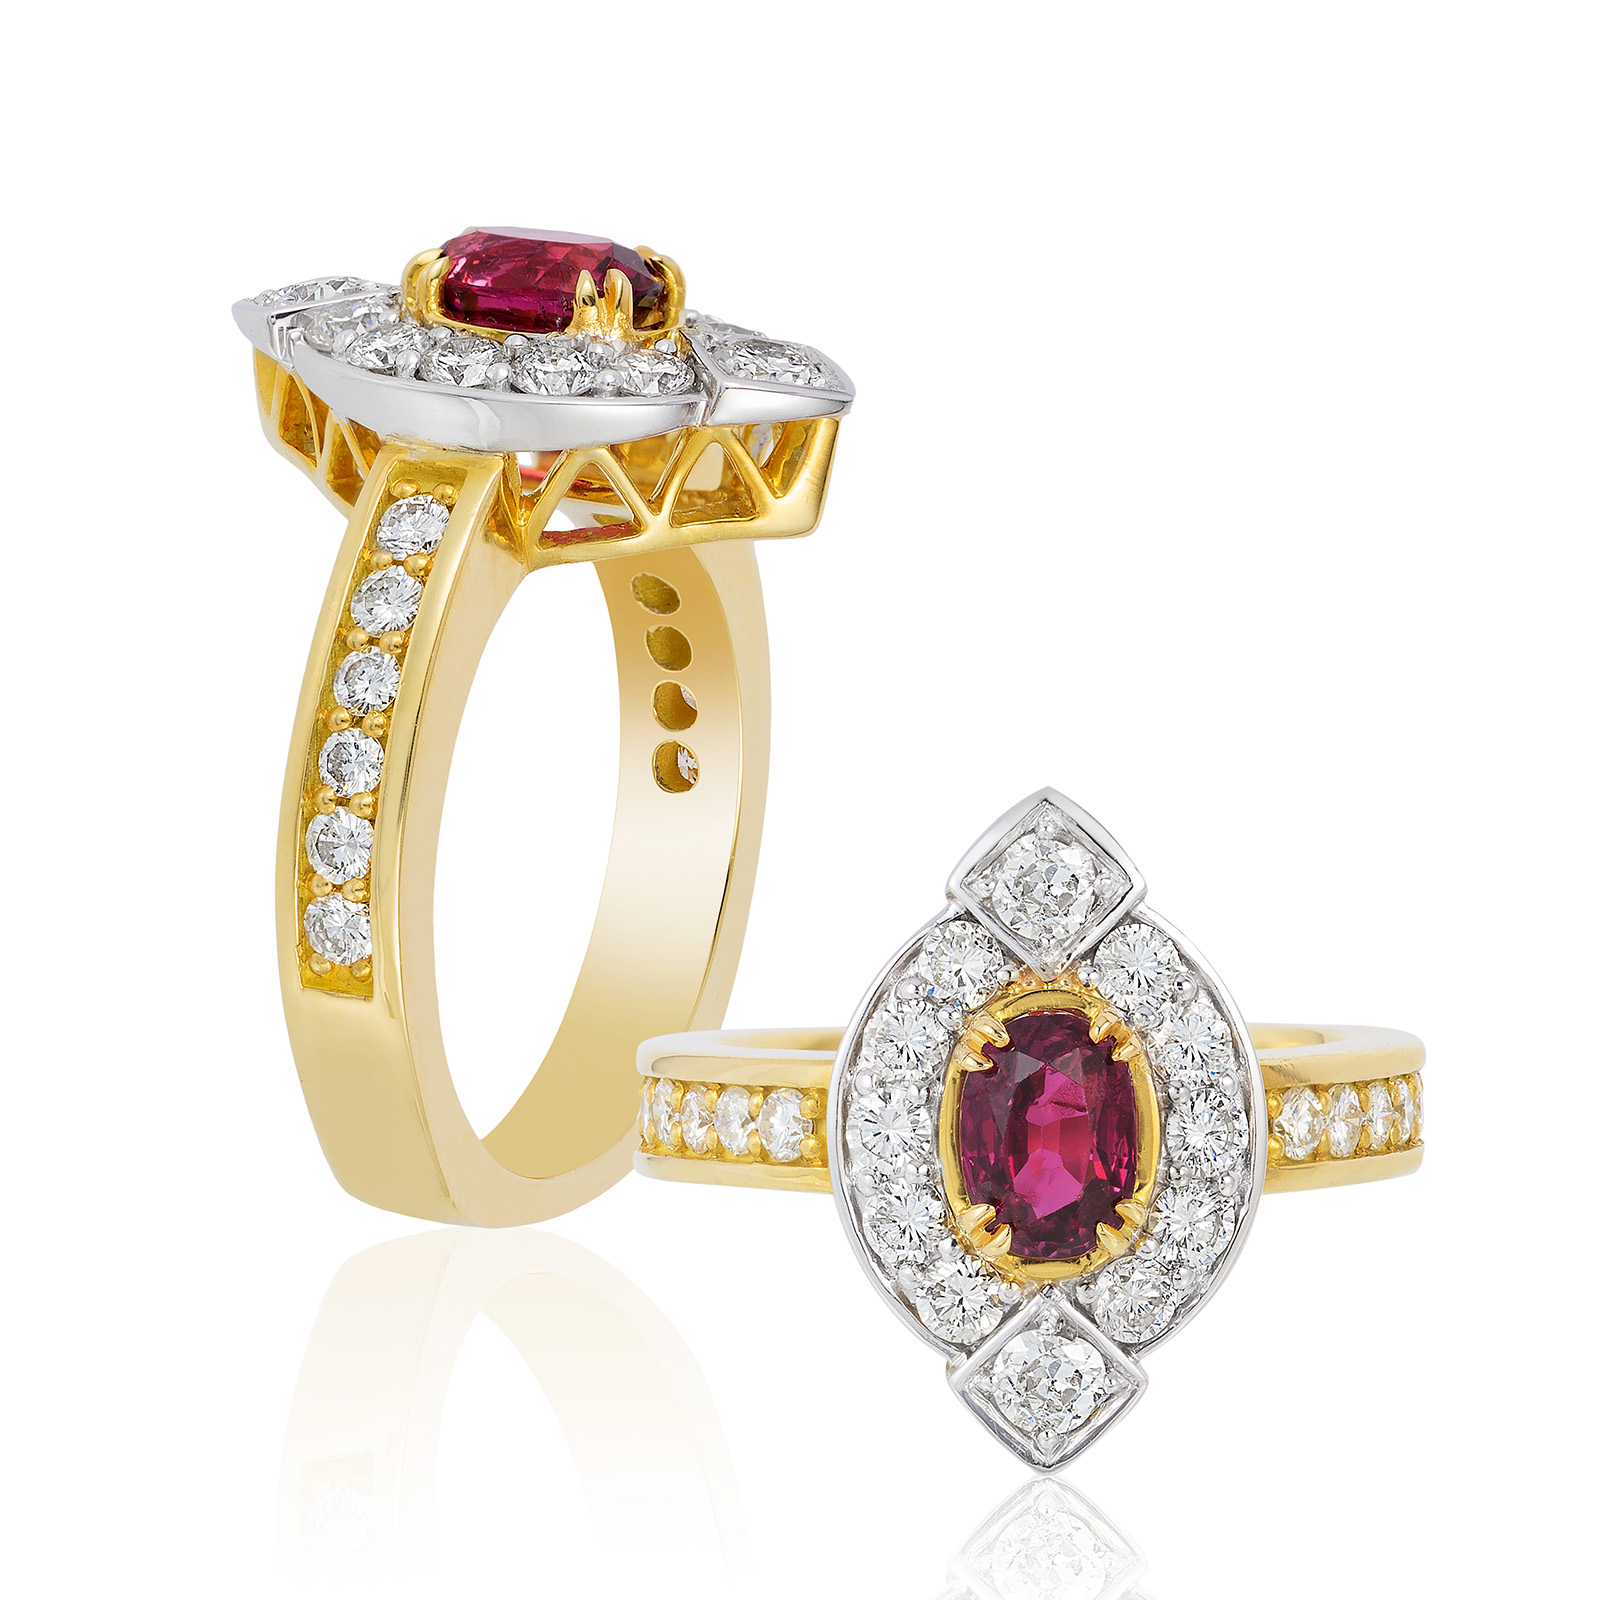 "Red, White and Love" ~ Cynthia Renée full custom design ring in 18 karat yellow and white gold featuring 1.24 carat oval ruby accented by 0.80 carats of round diamonds.  This ring was a redesign using the ruby and diamonds in three rings the client no longer wore. 